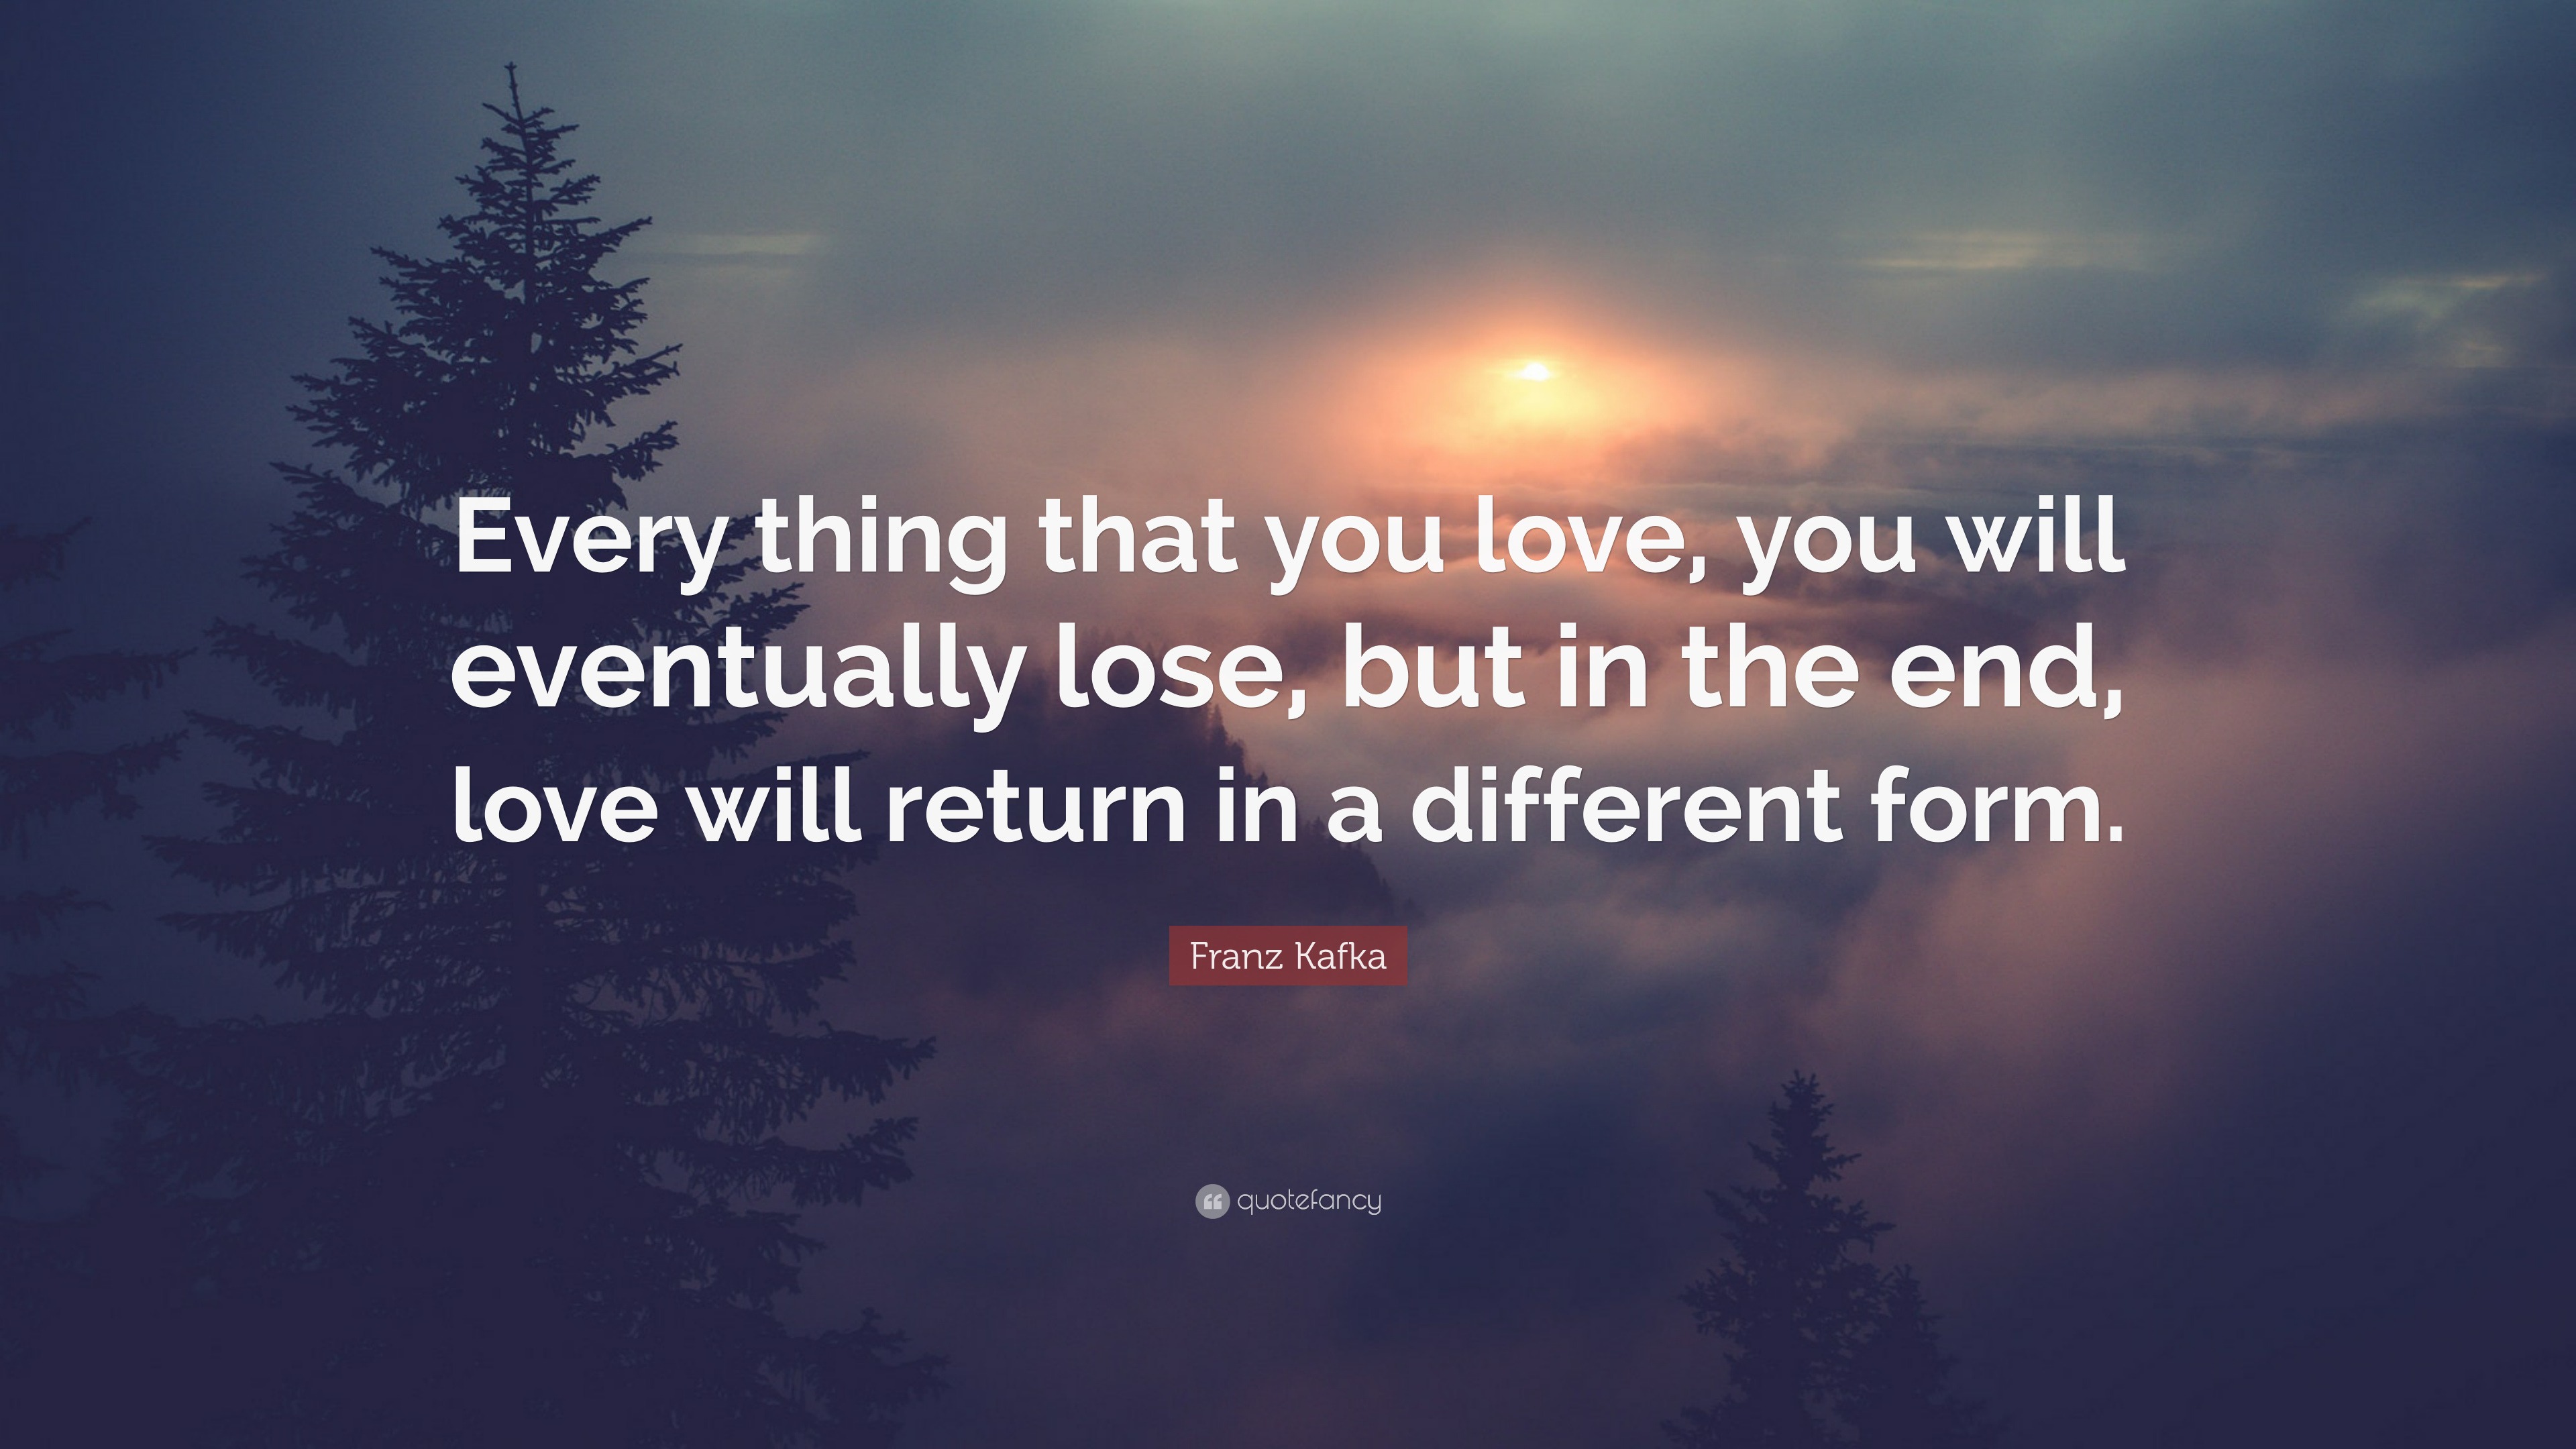 Franz Kafka Quote Every Thing That You Love You Will Eventually Lose But In The End Love Will Return In A Different Form 12 Wallpapers Quotefancy